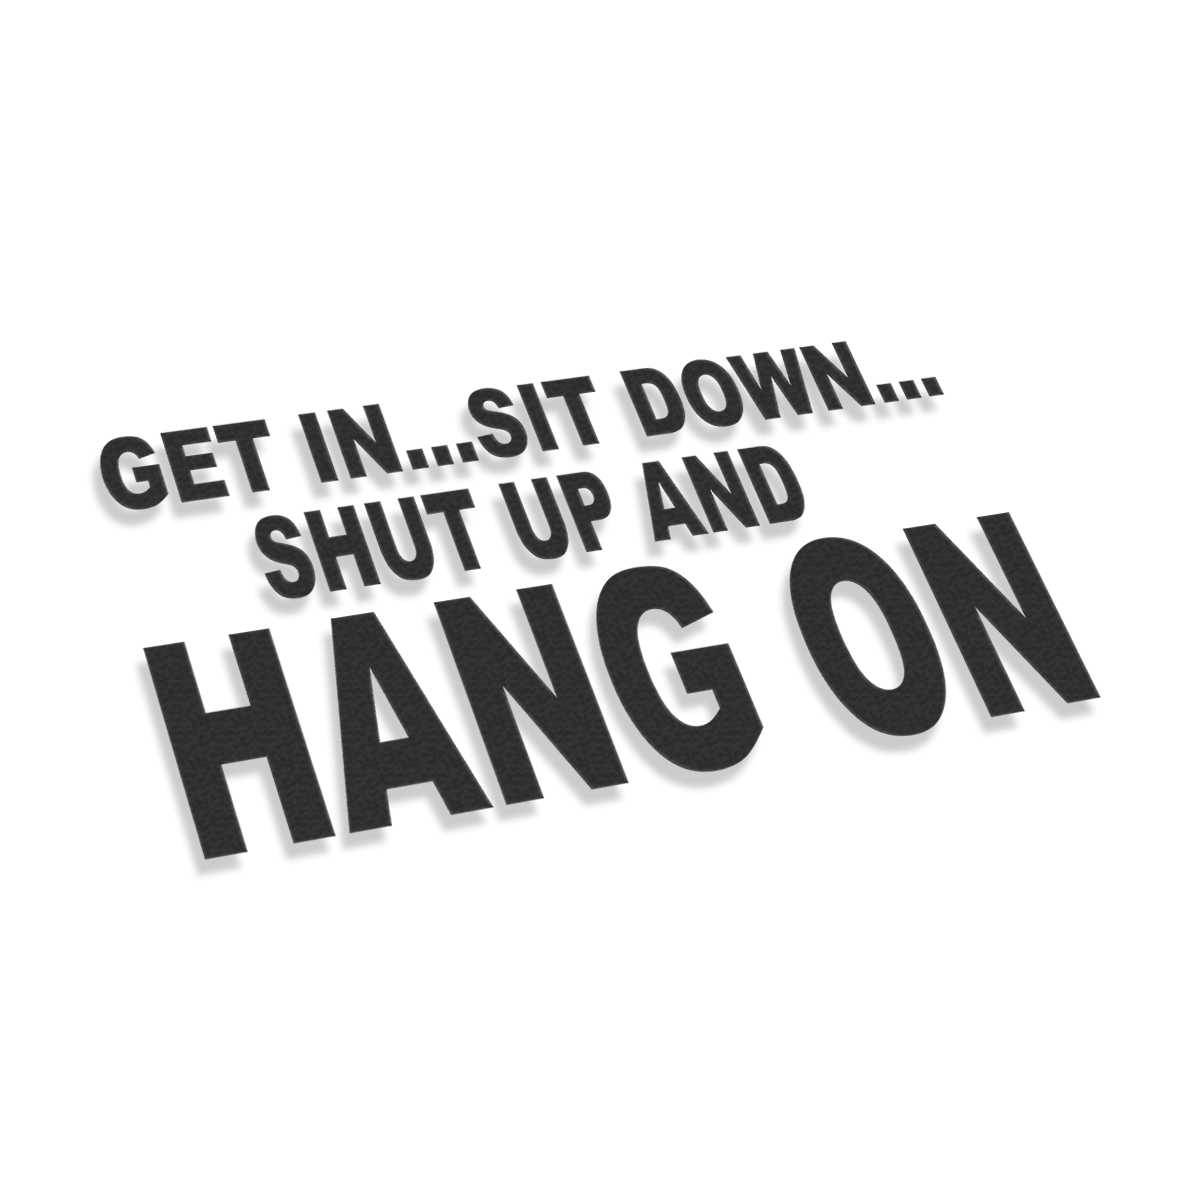 GET IN...SIT DOWN SHUT UP HANG ON ~ VINYL GRAPHIC DECAL STICKER ~ 5 COLORS